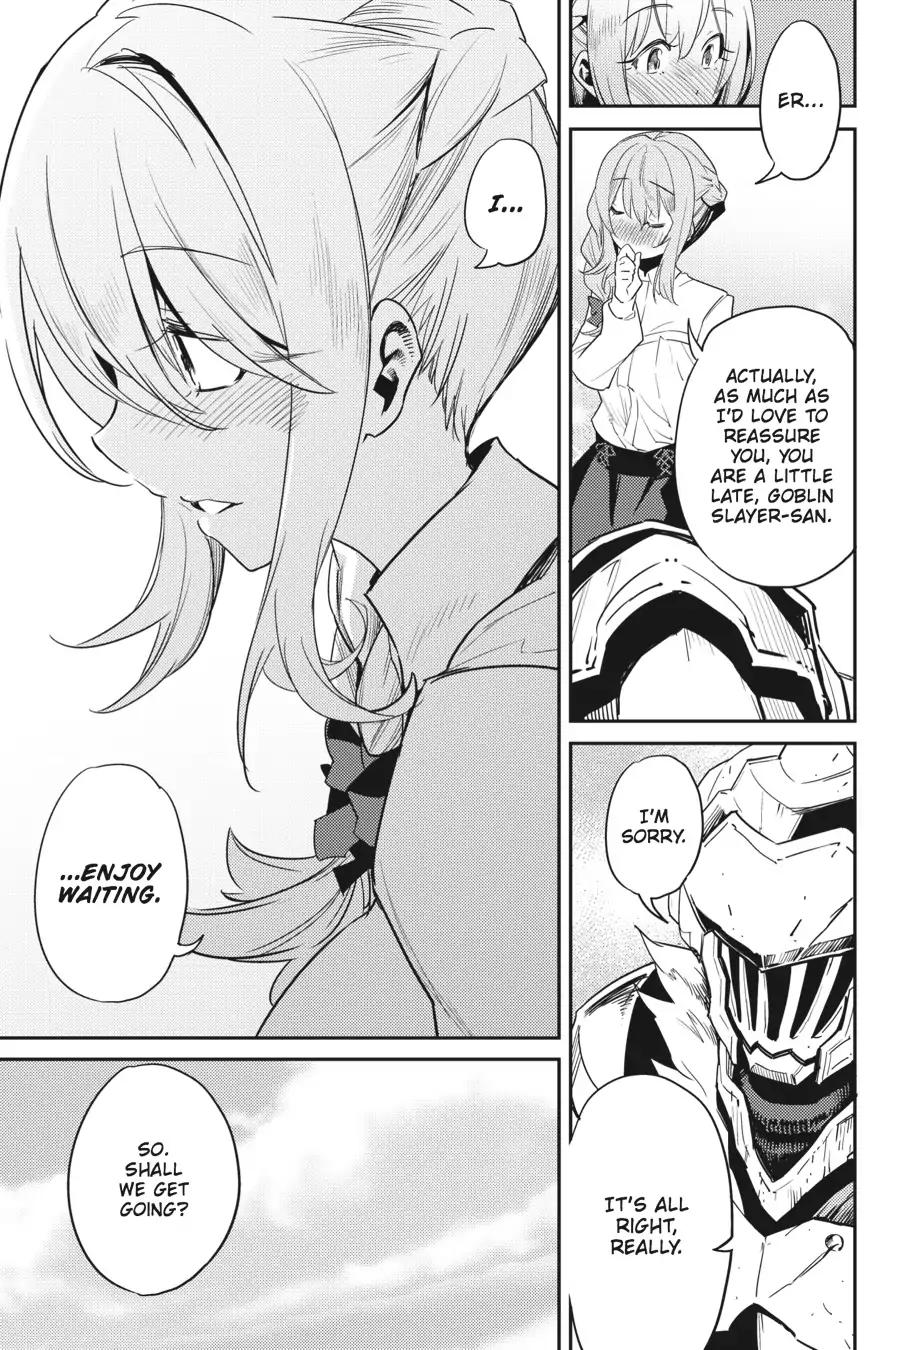 Goblin Slayer chapter 34 page 4